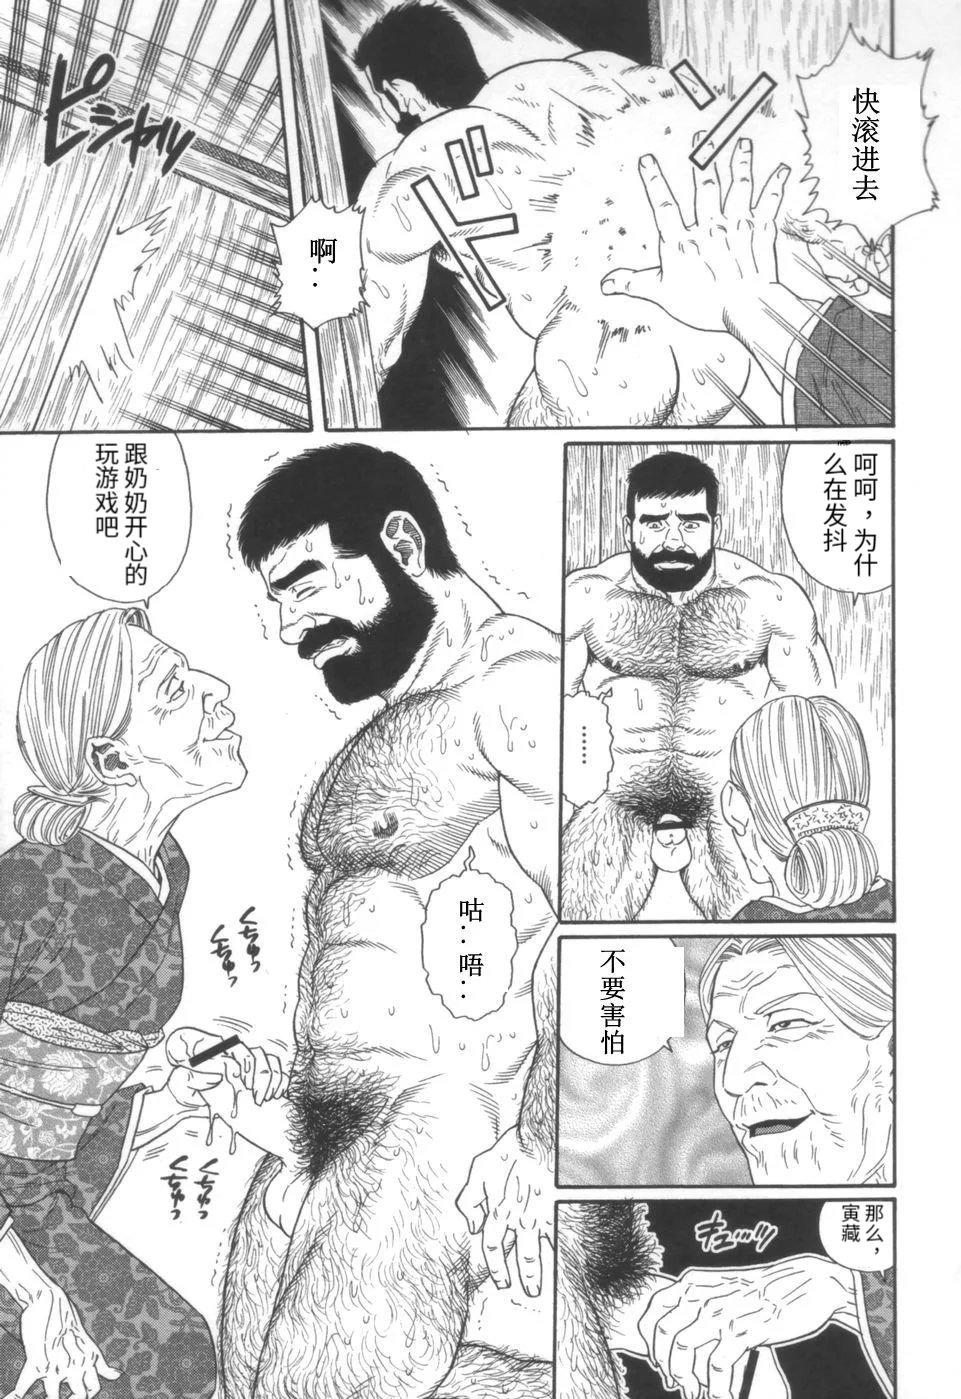 Suckingcock Gedou no Ie Joukan | 邪道之家 Vol. 1 Ch.4 Inked - Page 3